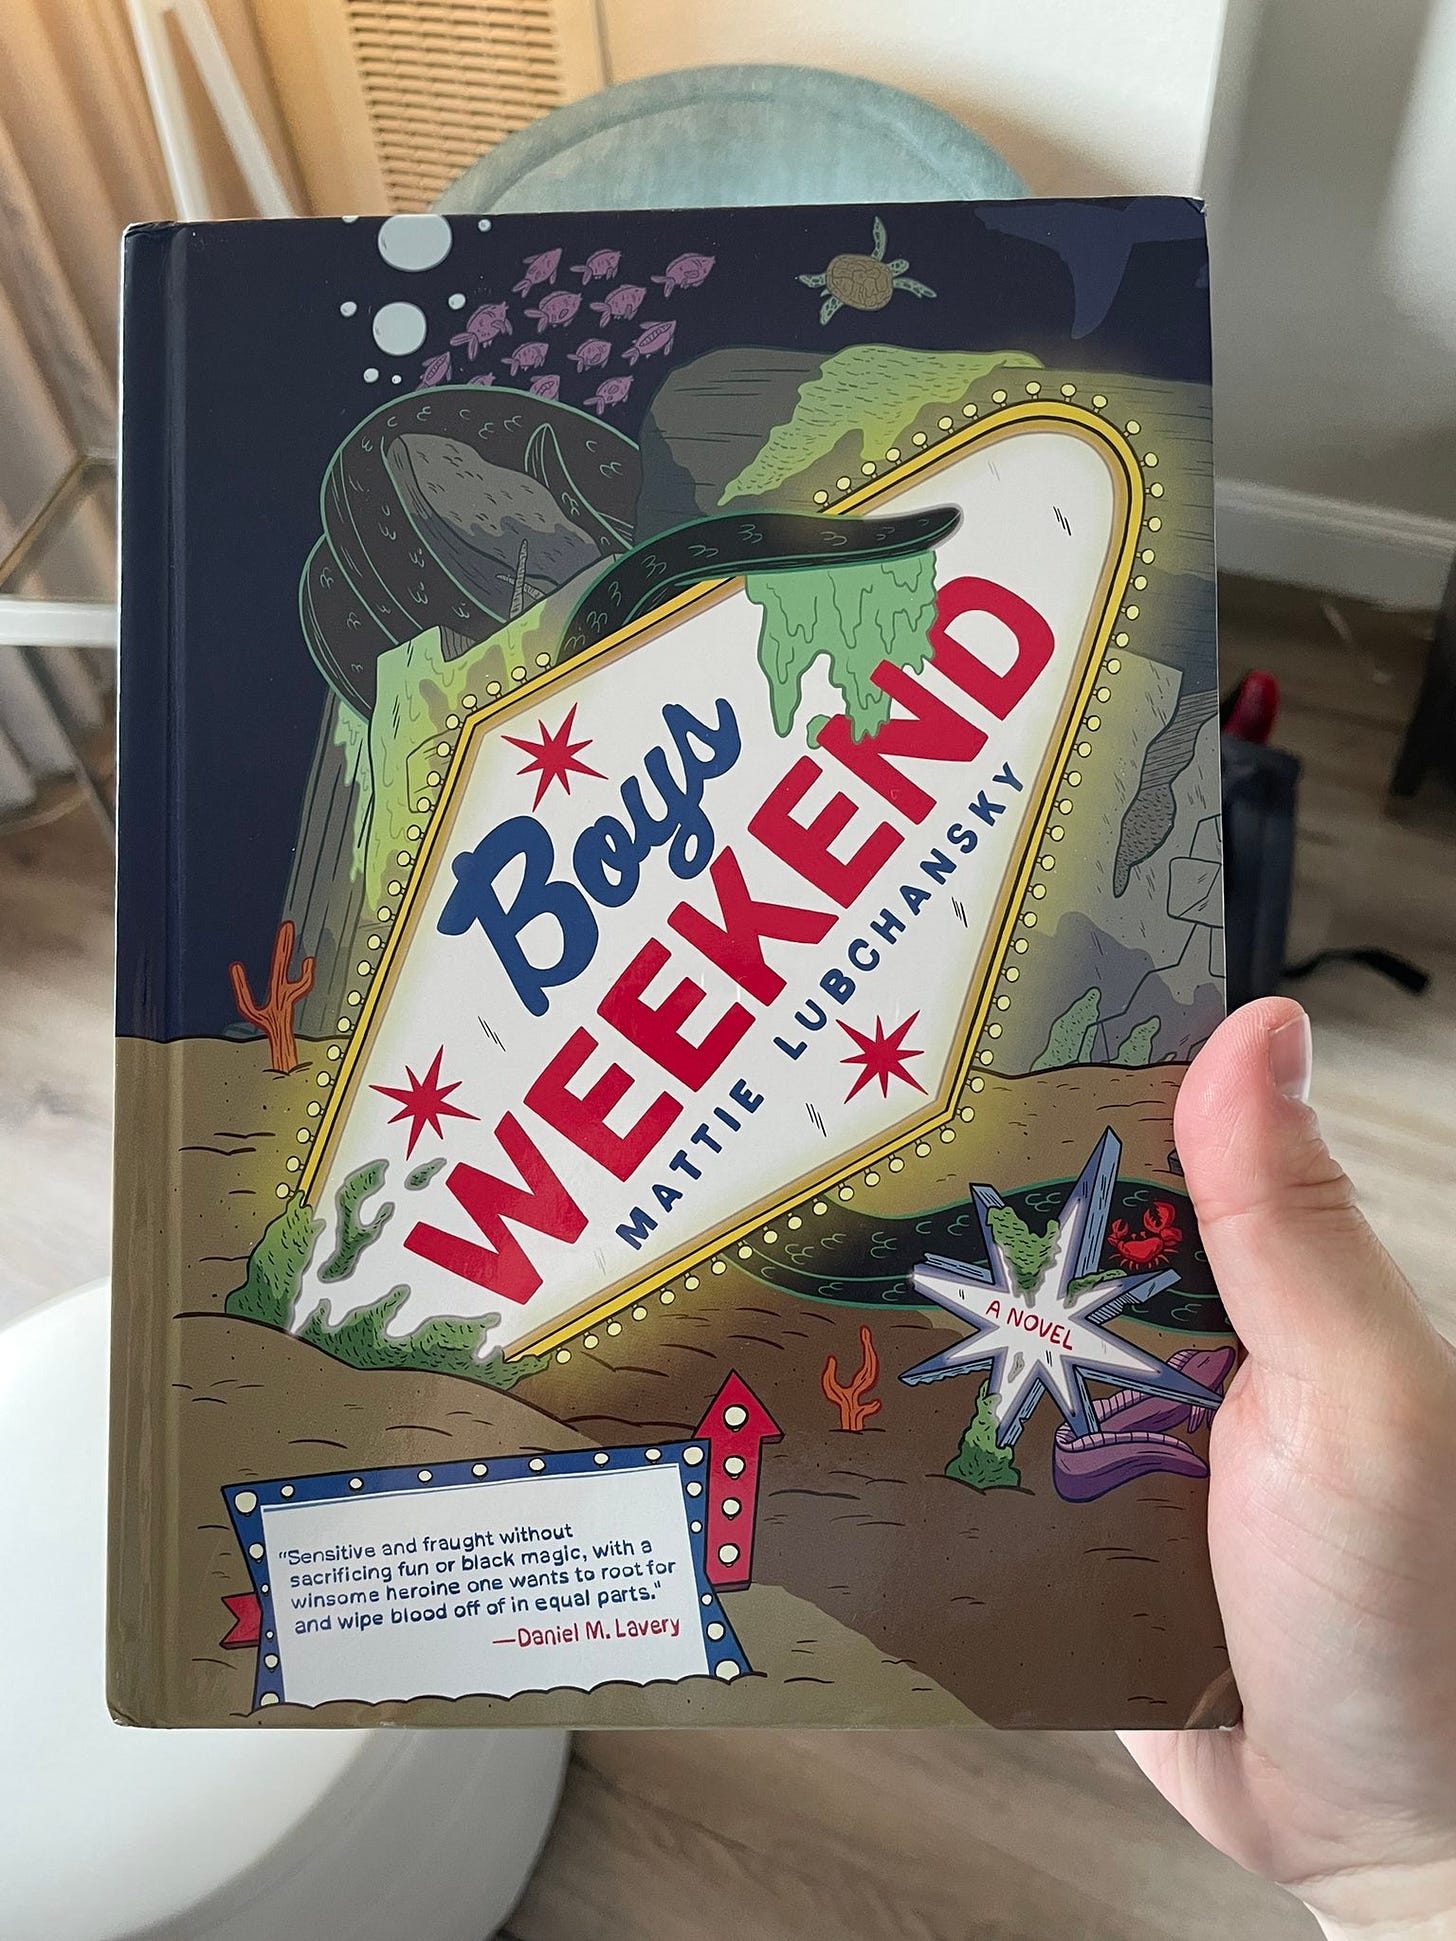 The front cover of Boys Weekend by Mattie Lubchansky.